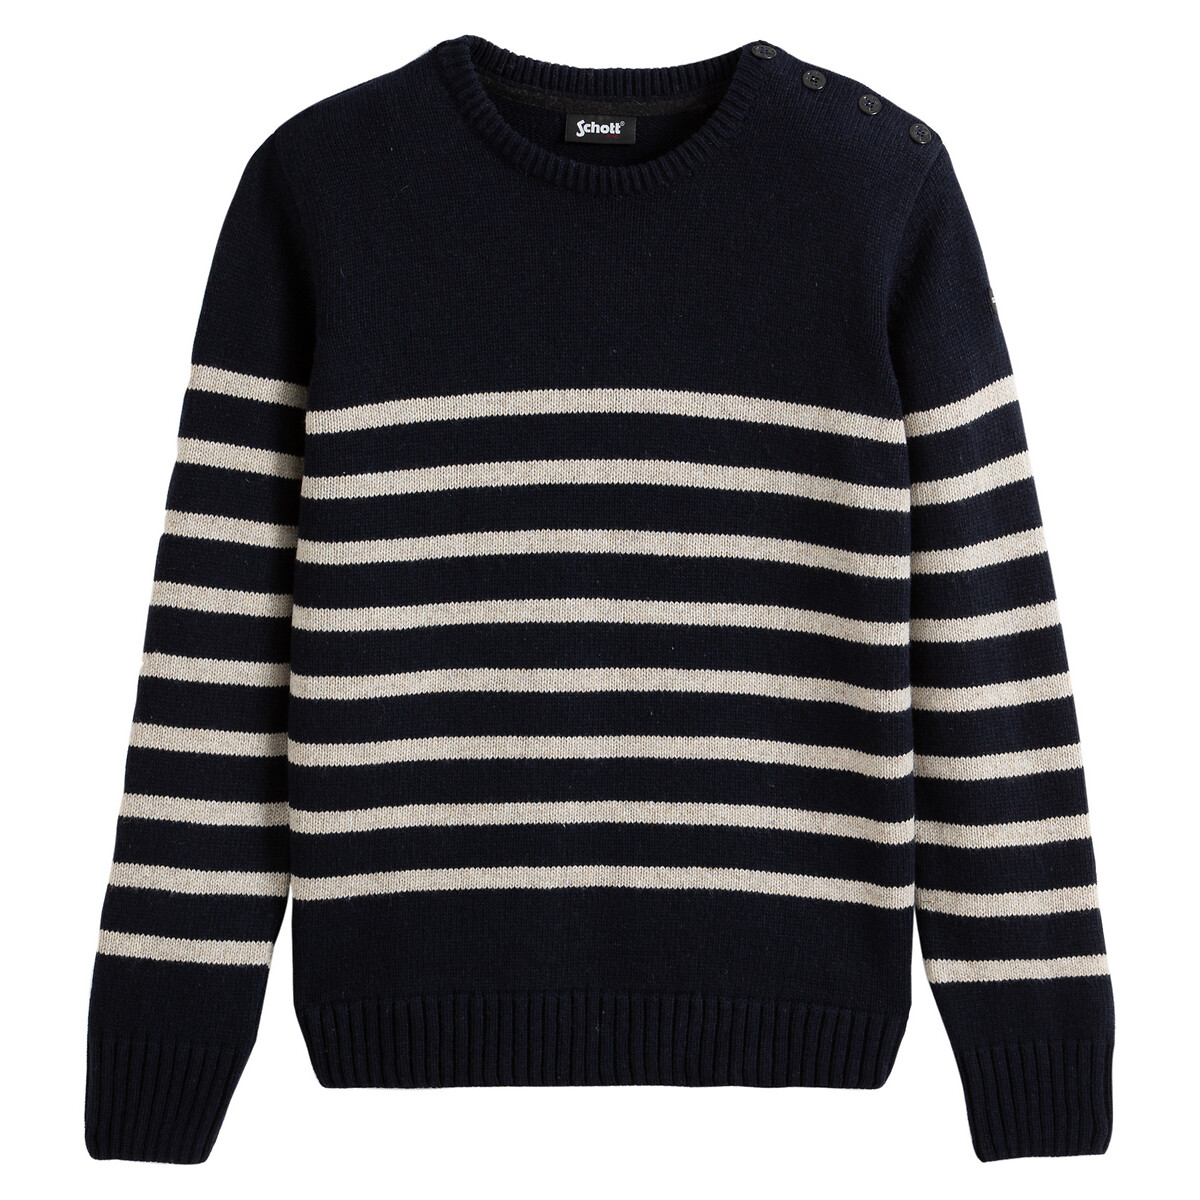 PL Outrider 1 Jumper with Breton Stripes